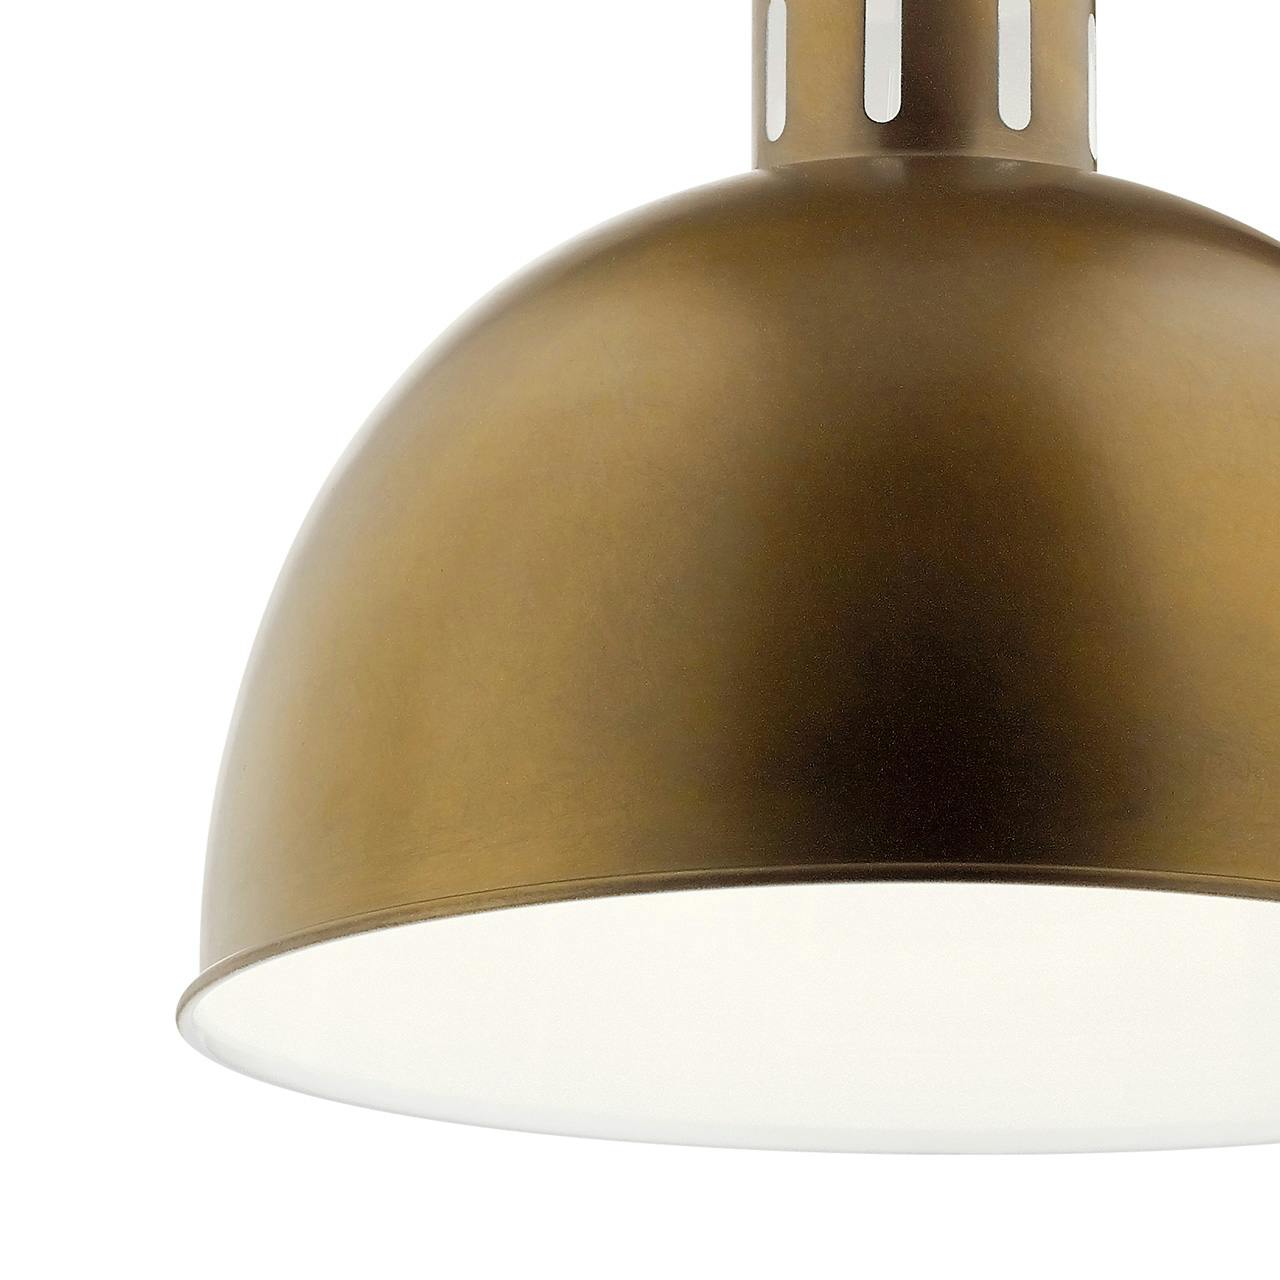 Close up view of the Zailey 15.75" 1 Light Pendant in Brass on a white background